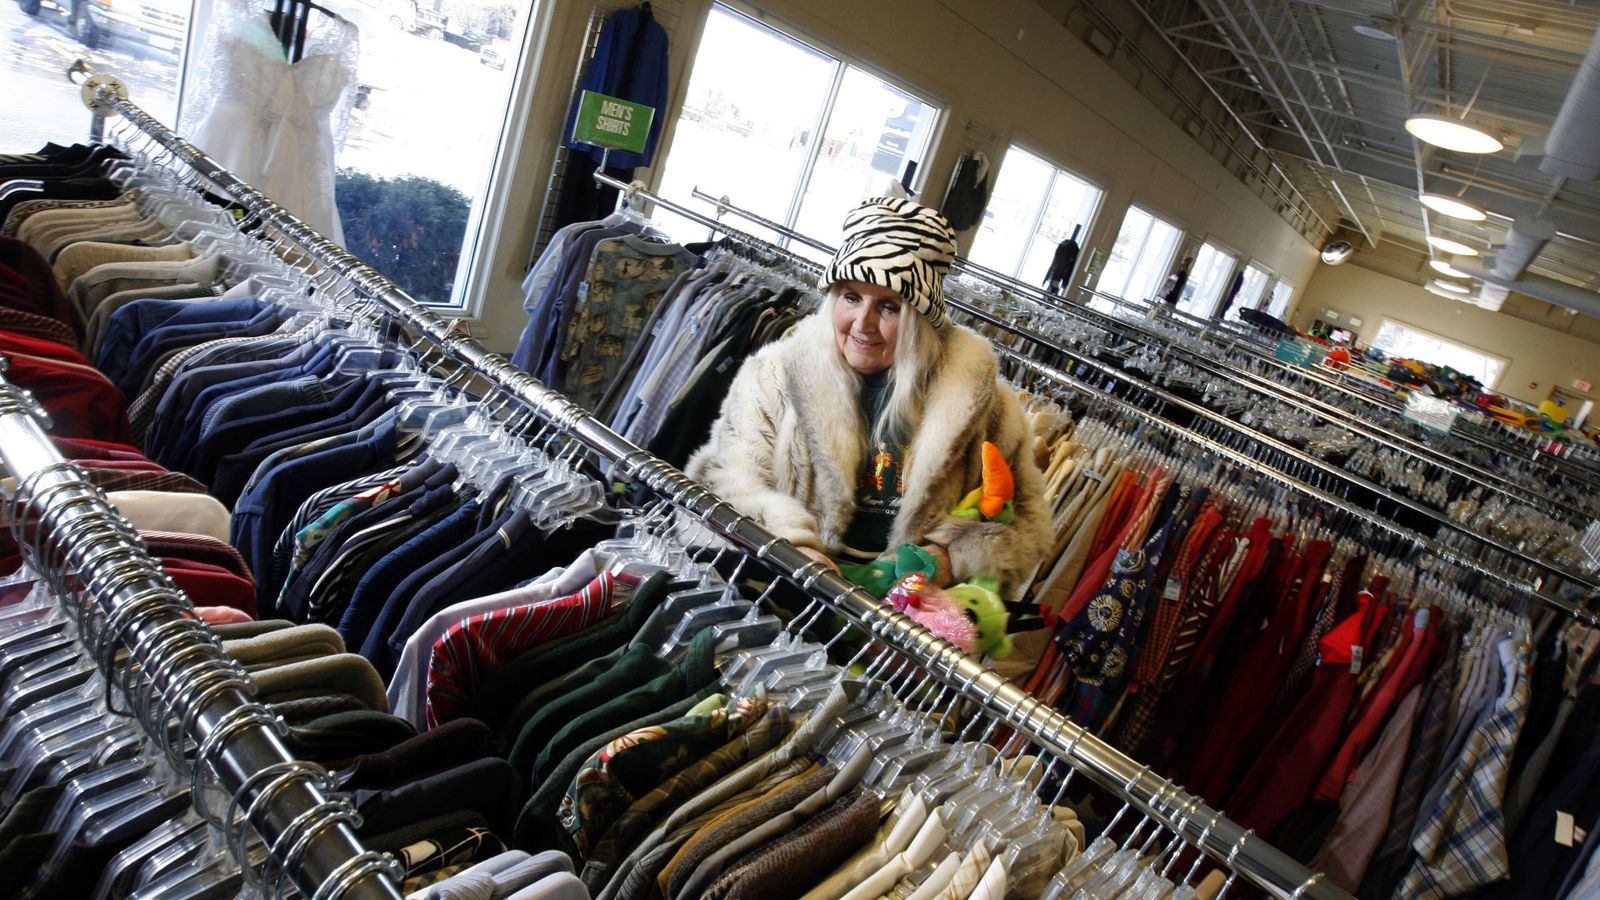 15 ideas for thrift shopping, as told by Chicago readers - Axios Chicago